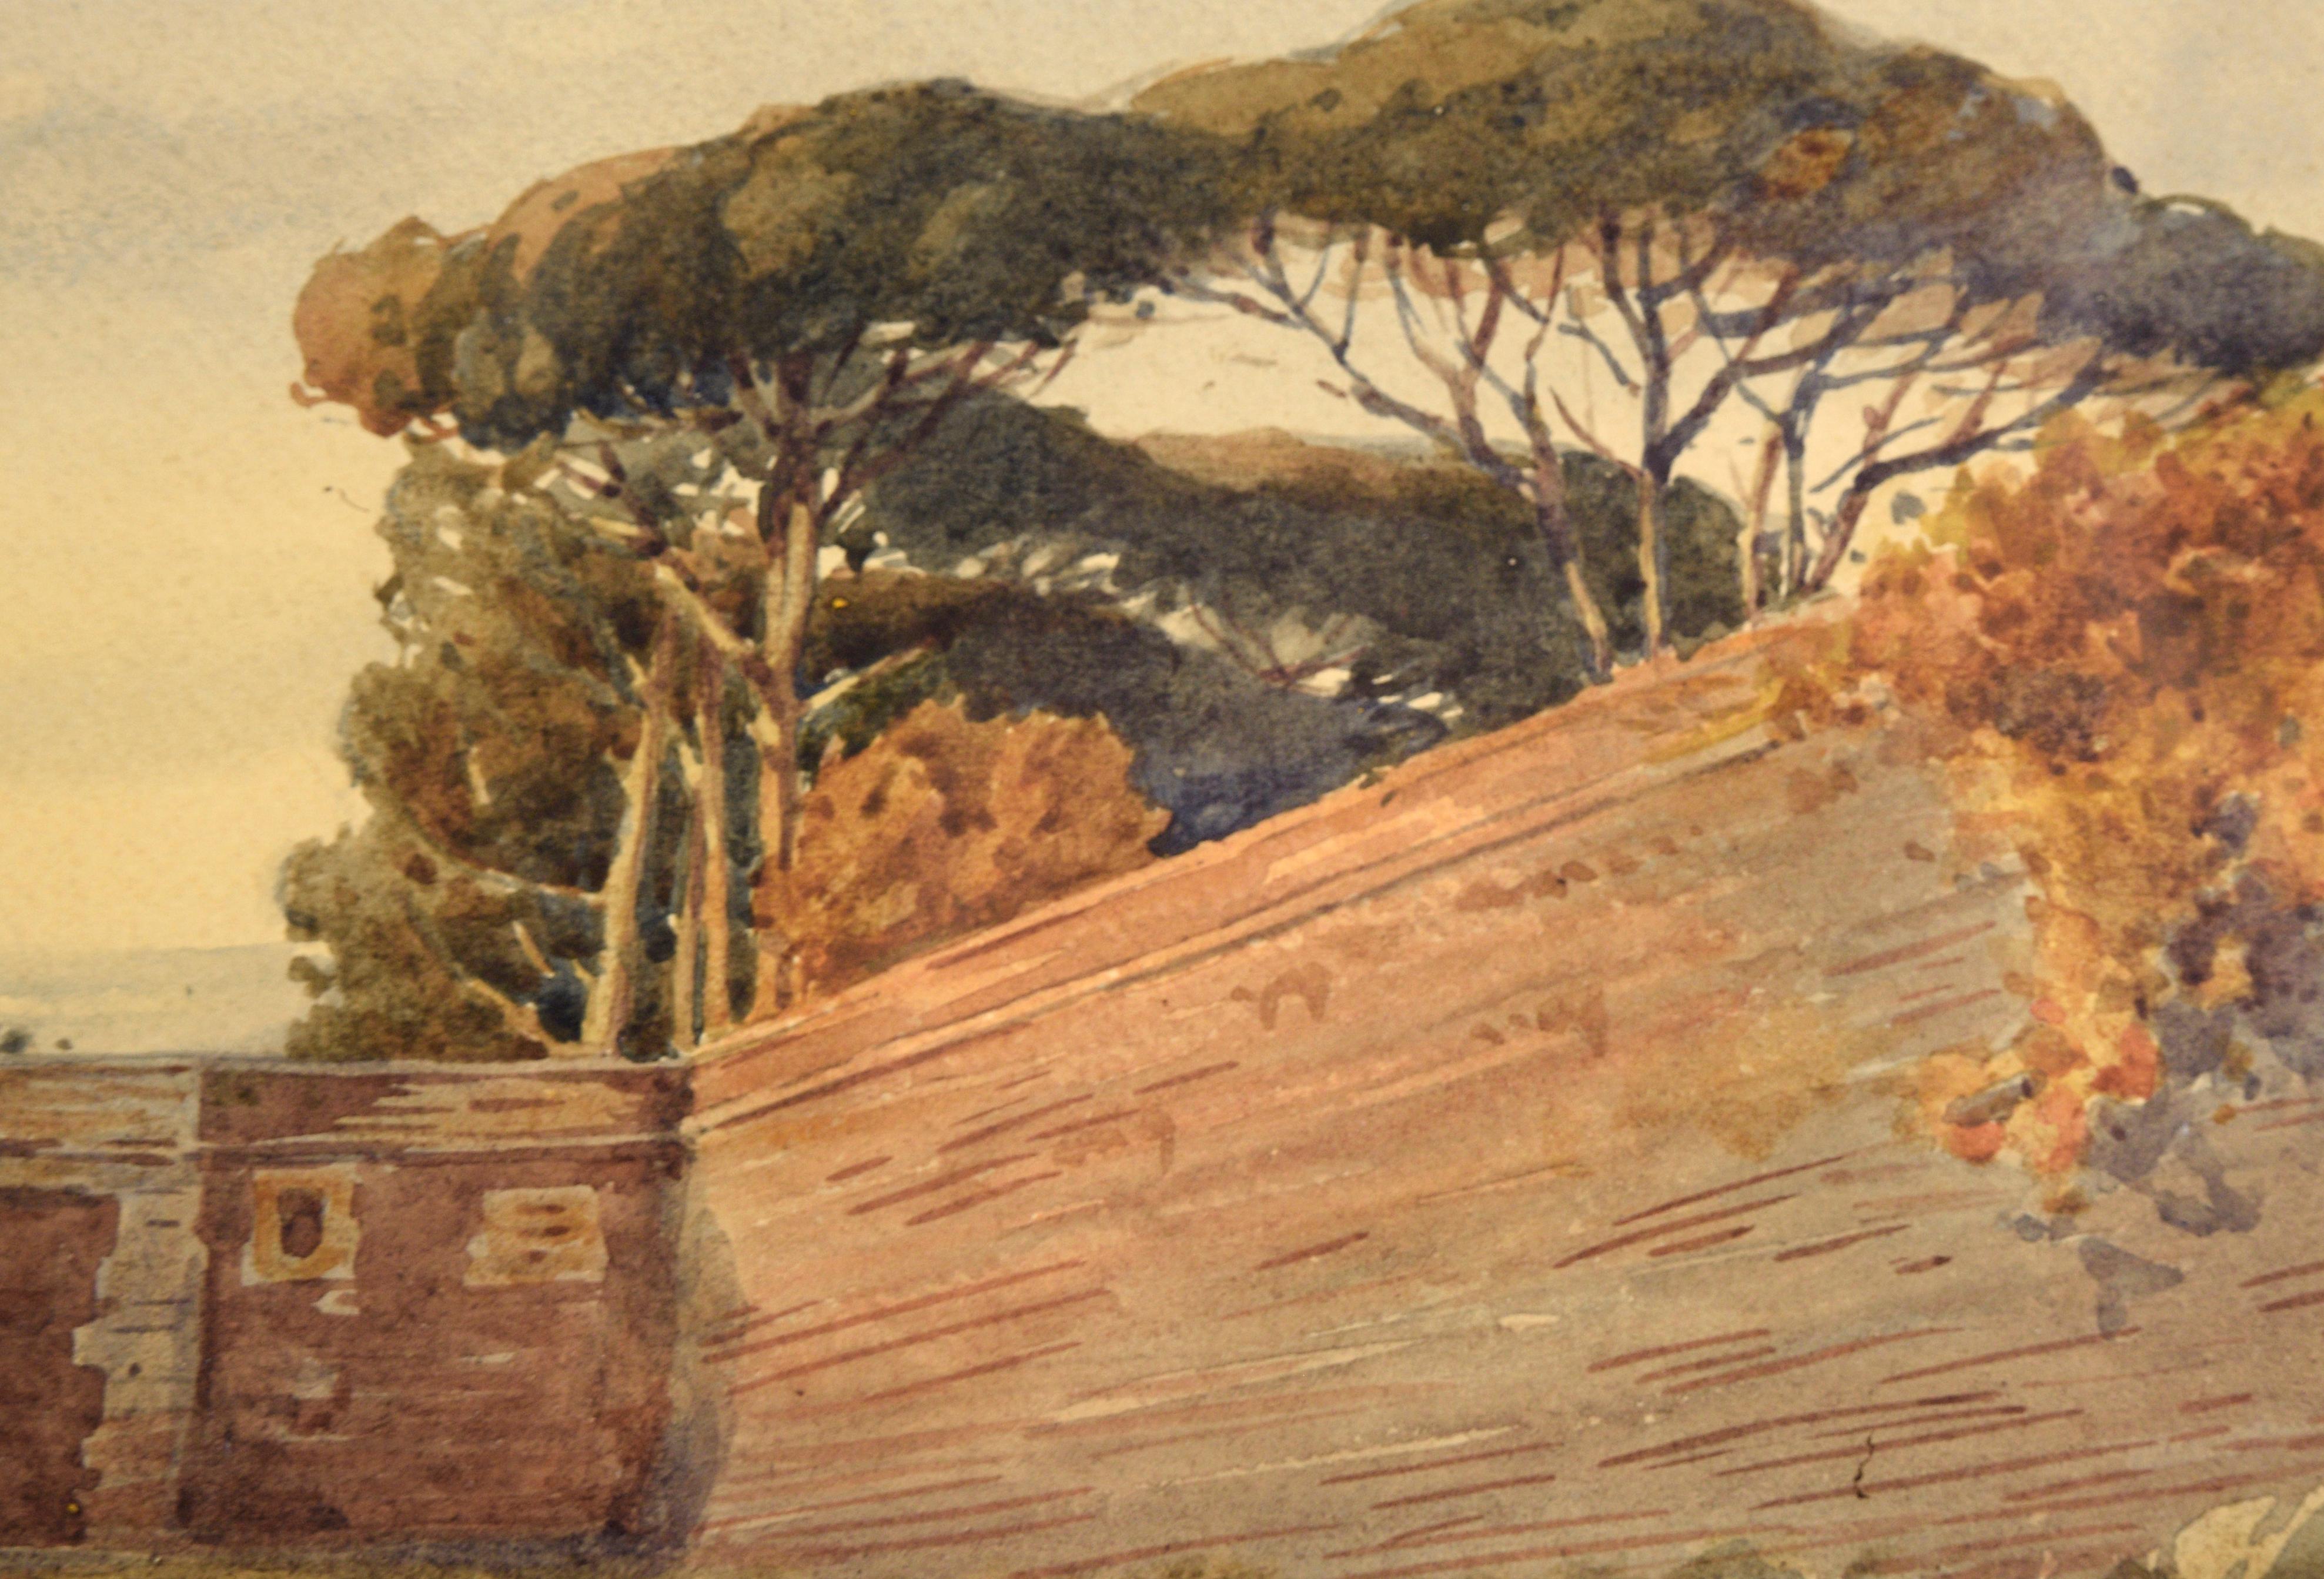 St. Peter's Basilica from the Edge of the City - Roman Lansdcape

Lush watercolor of a sunset behind St. Peter's Basilica by Gaetano Facciola (Italian, 1868-1949). From a road at the edge of town, the viewer is treated to a lovely view of the sunset